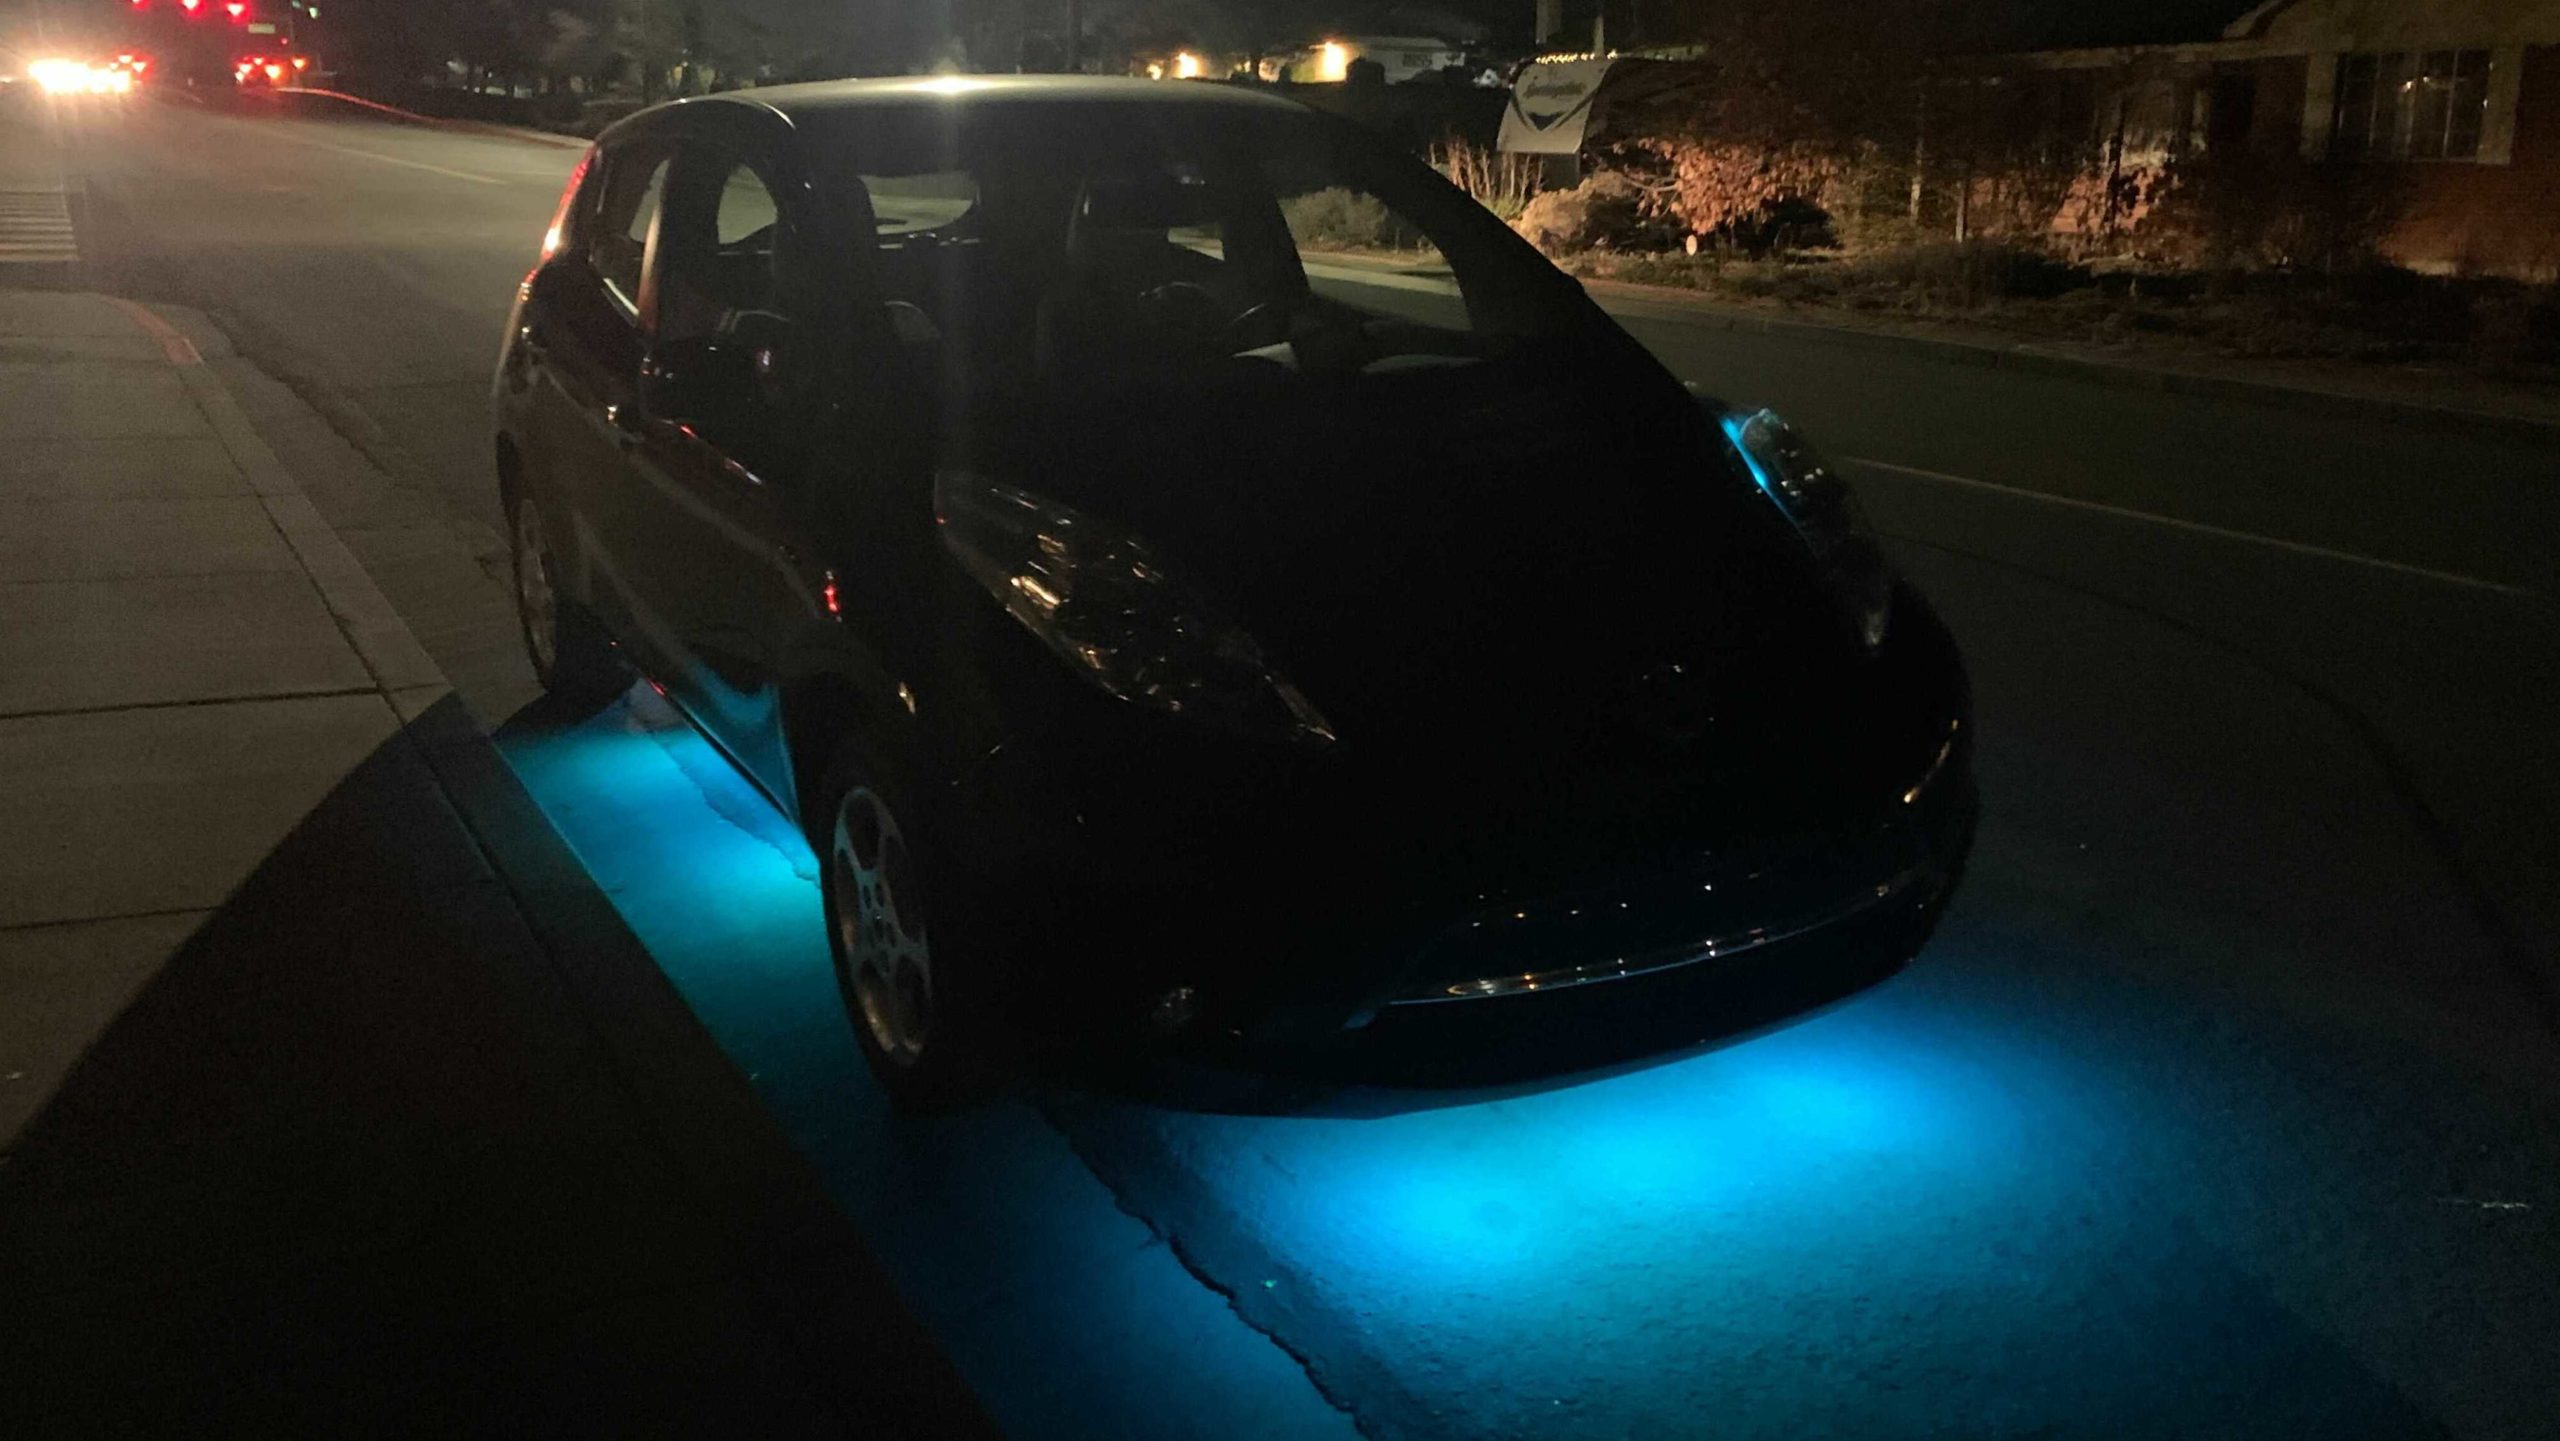 I Put LED Underglow On My Nissan Leaf Because Tesla Can’t Have All The EV Gimmicks